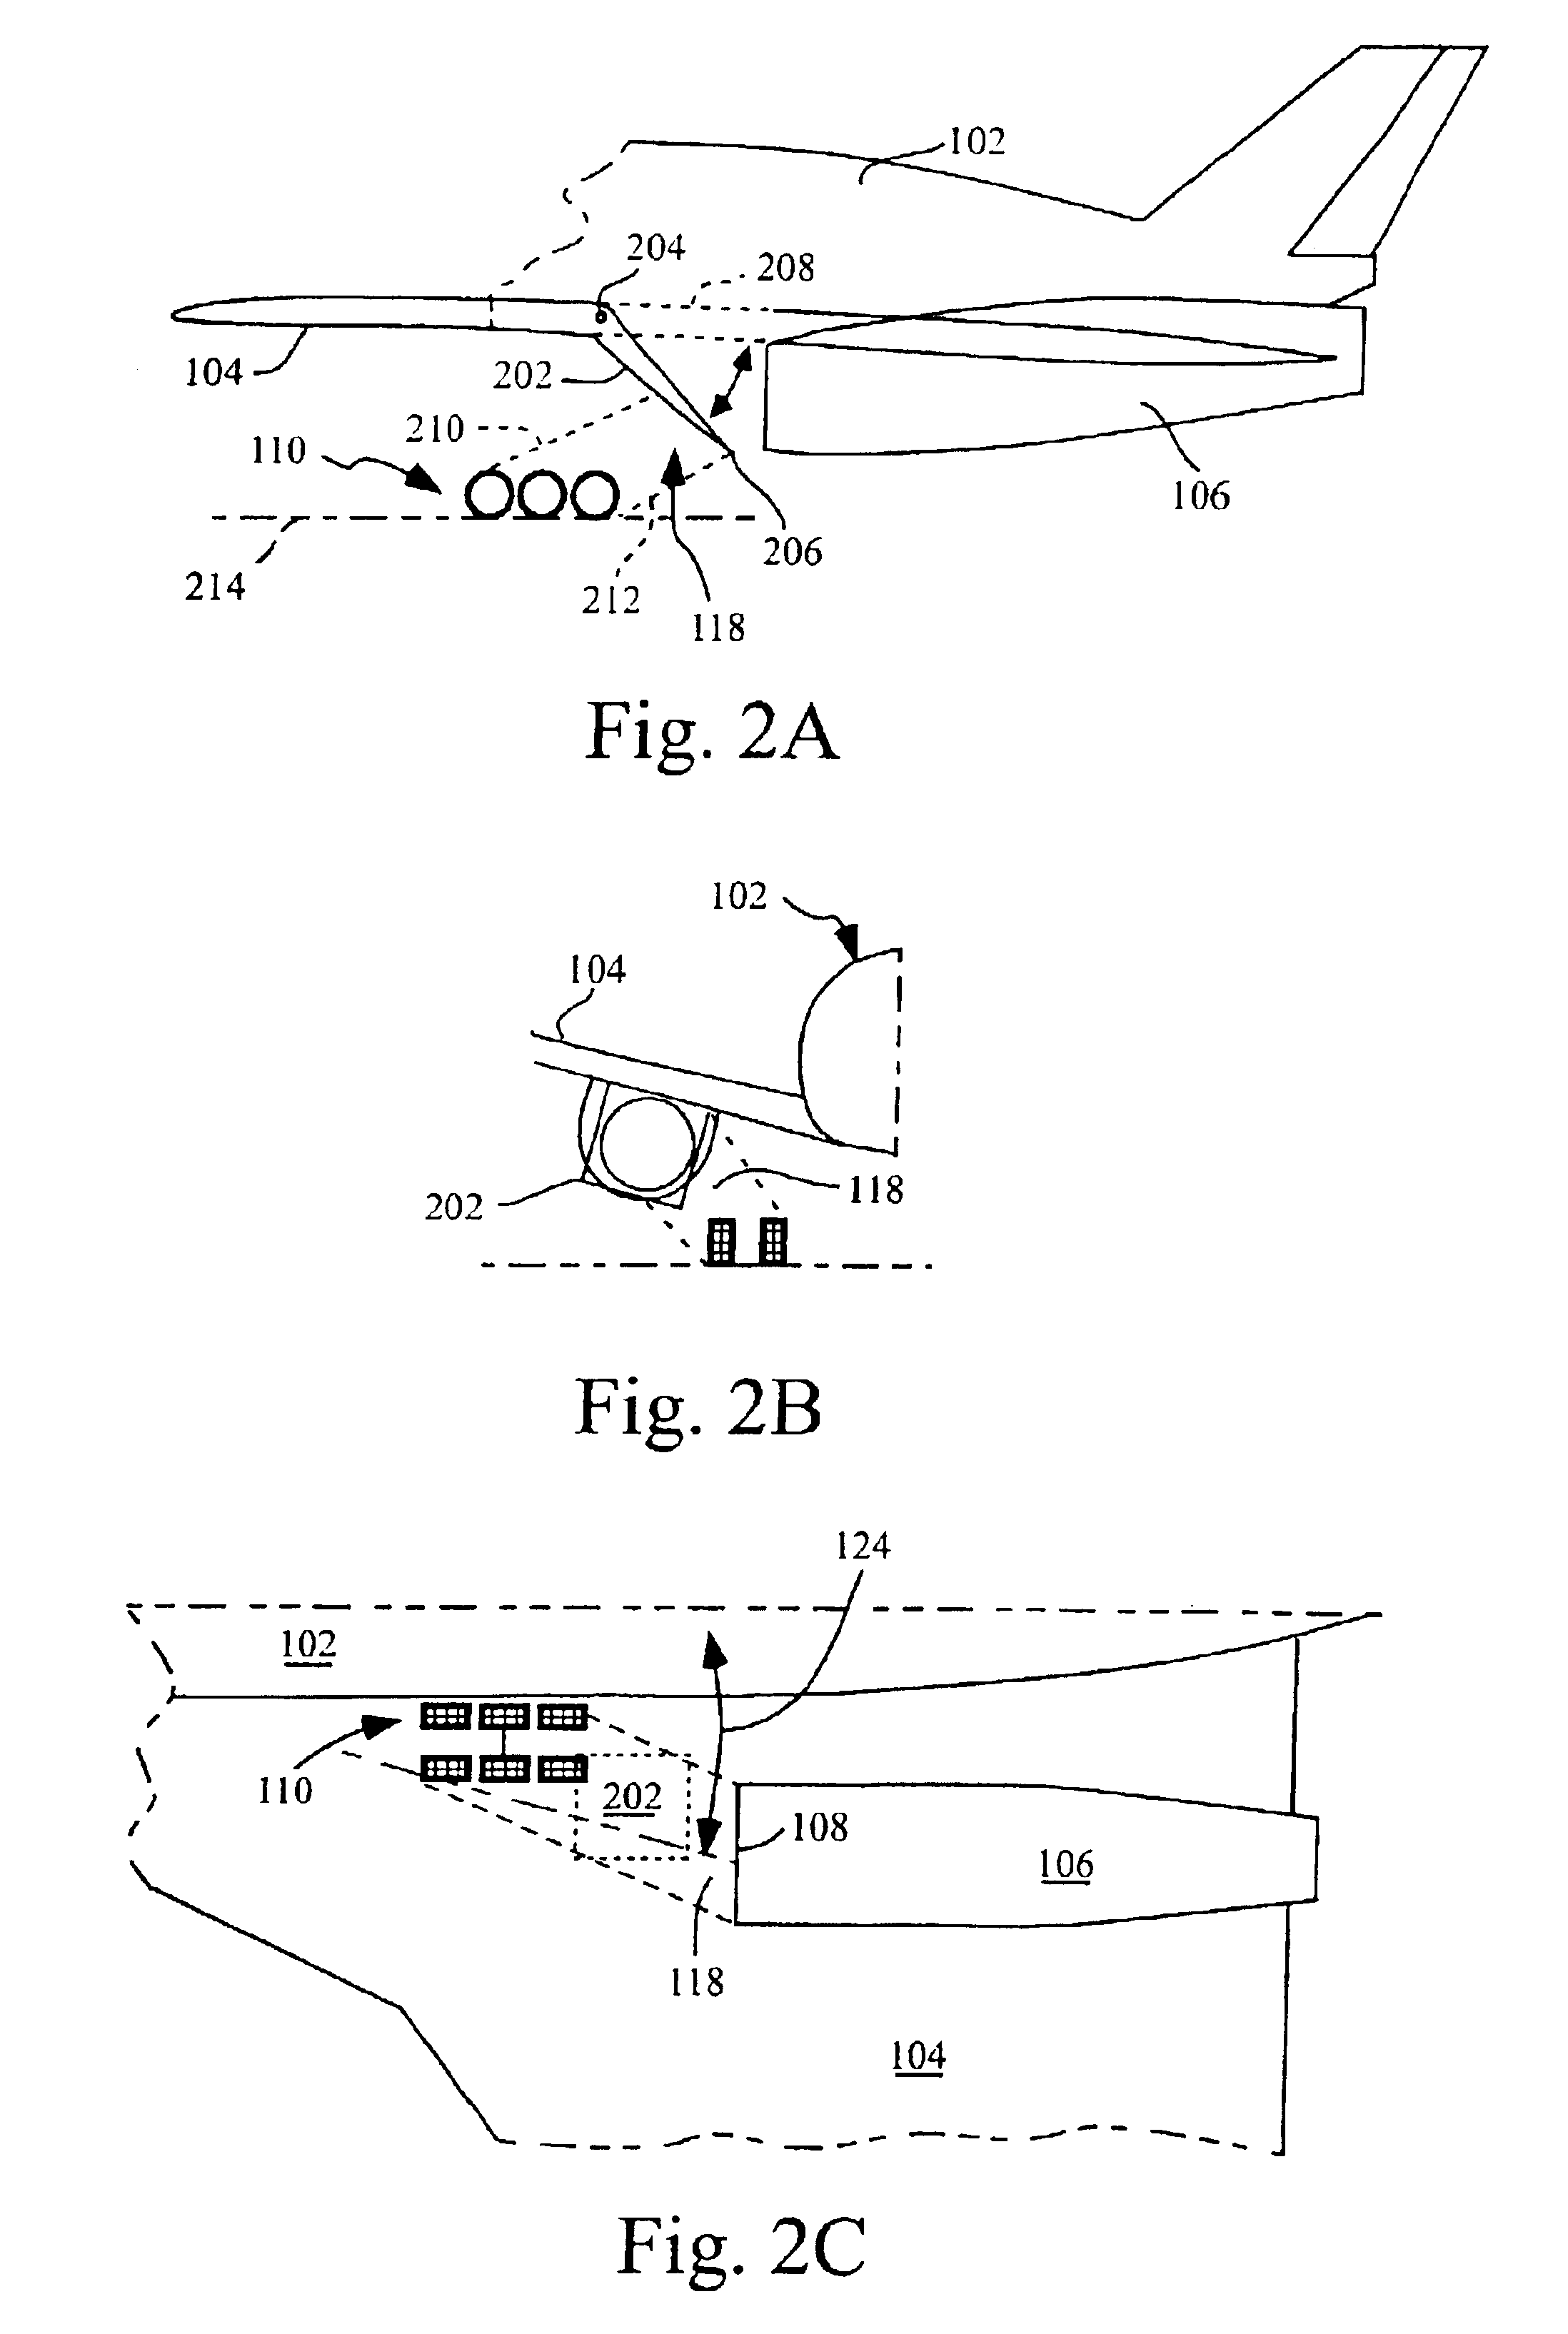 Apparatus and method for preventing foreign object damage to an aircraft